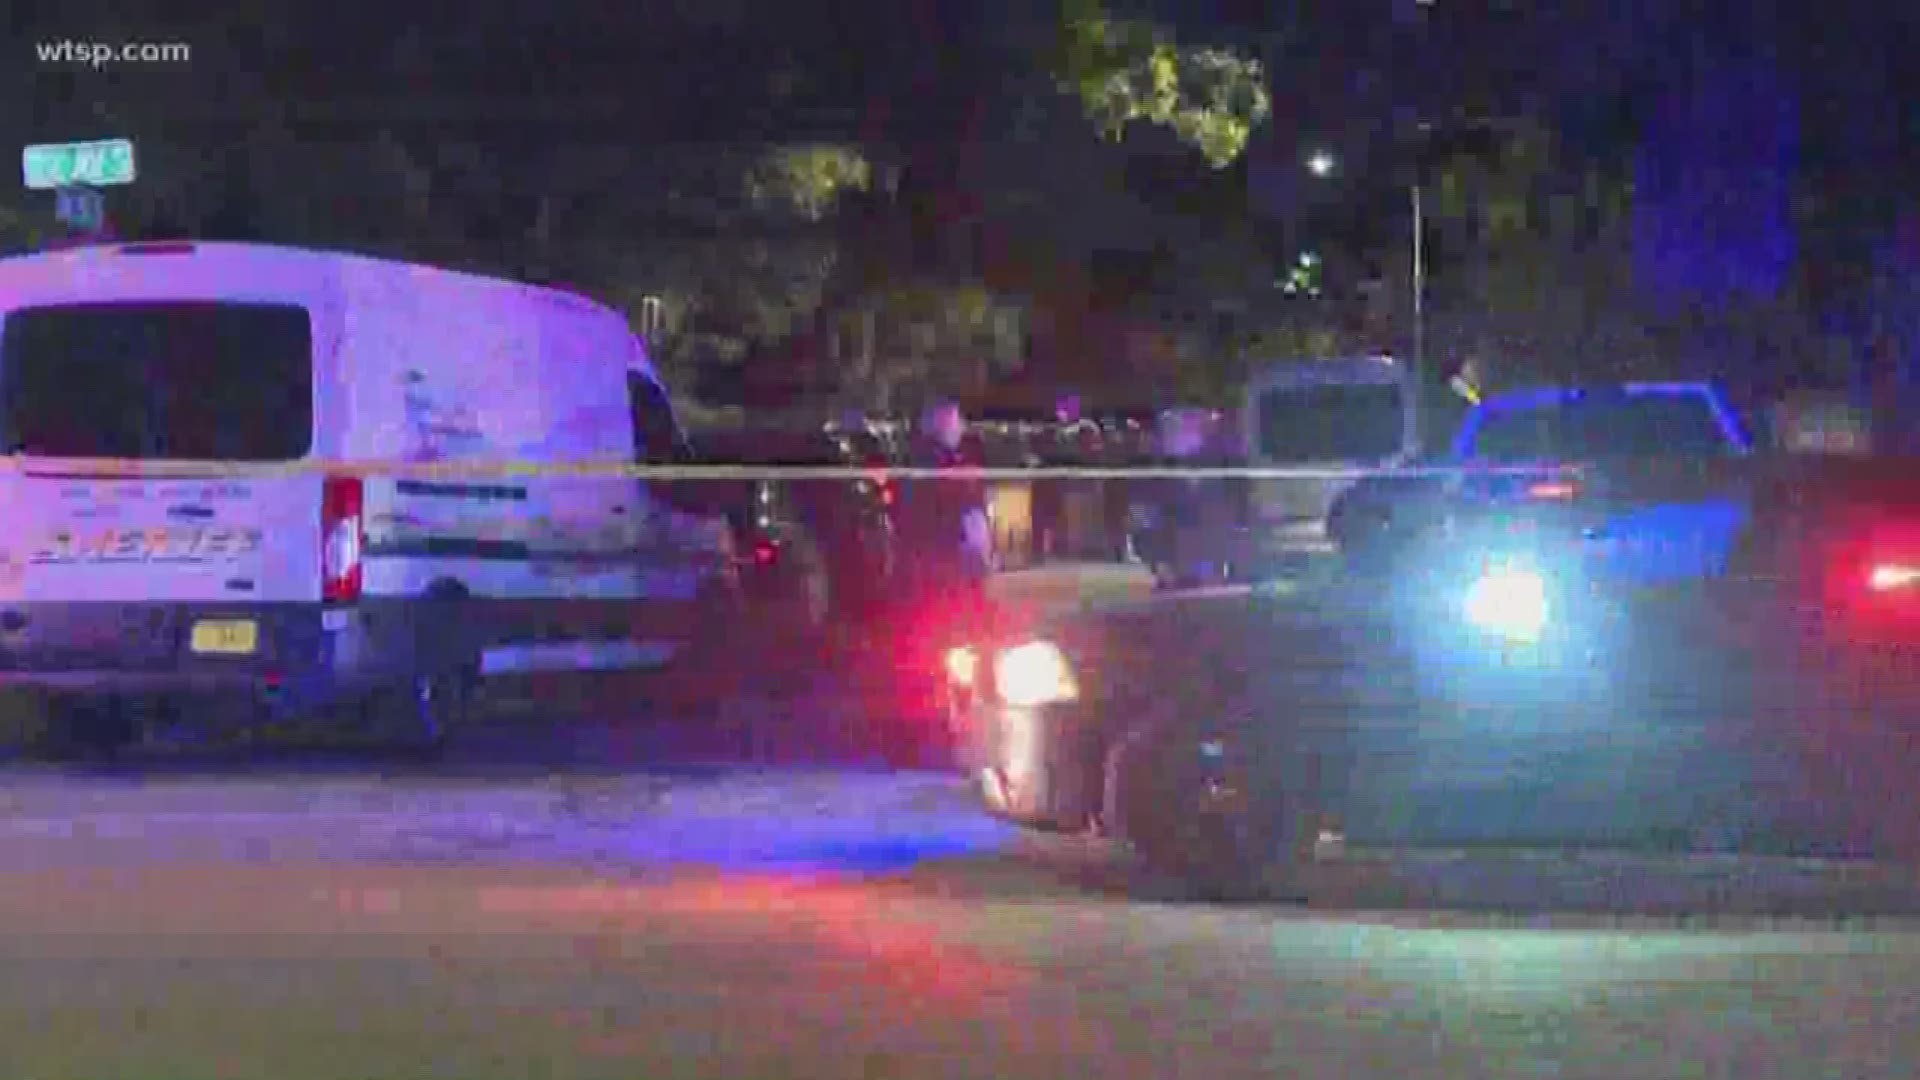 The Pinellas County Sheriff’s Office said no deputies were hurt in the shooting.